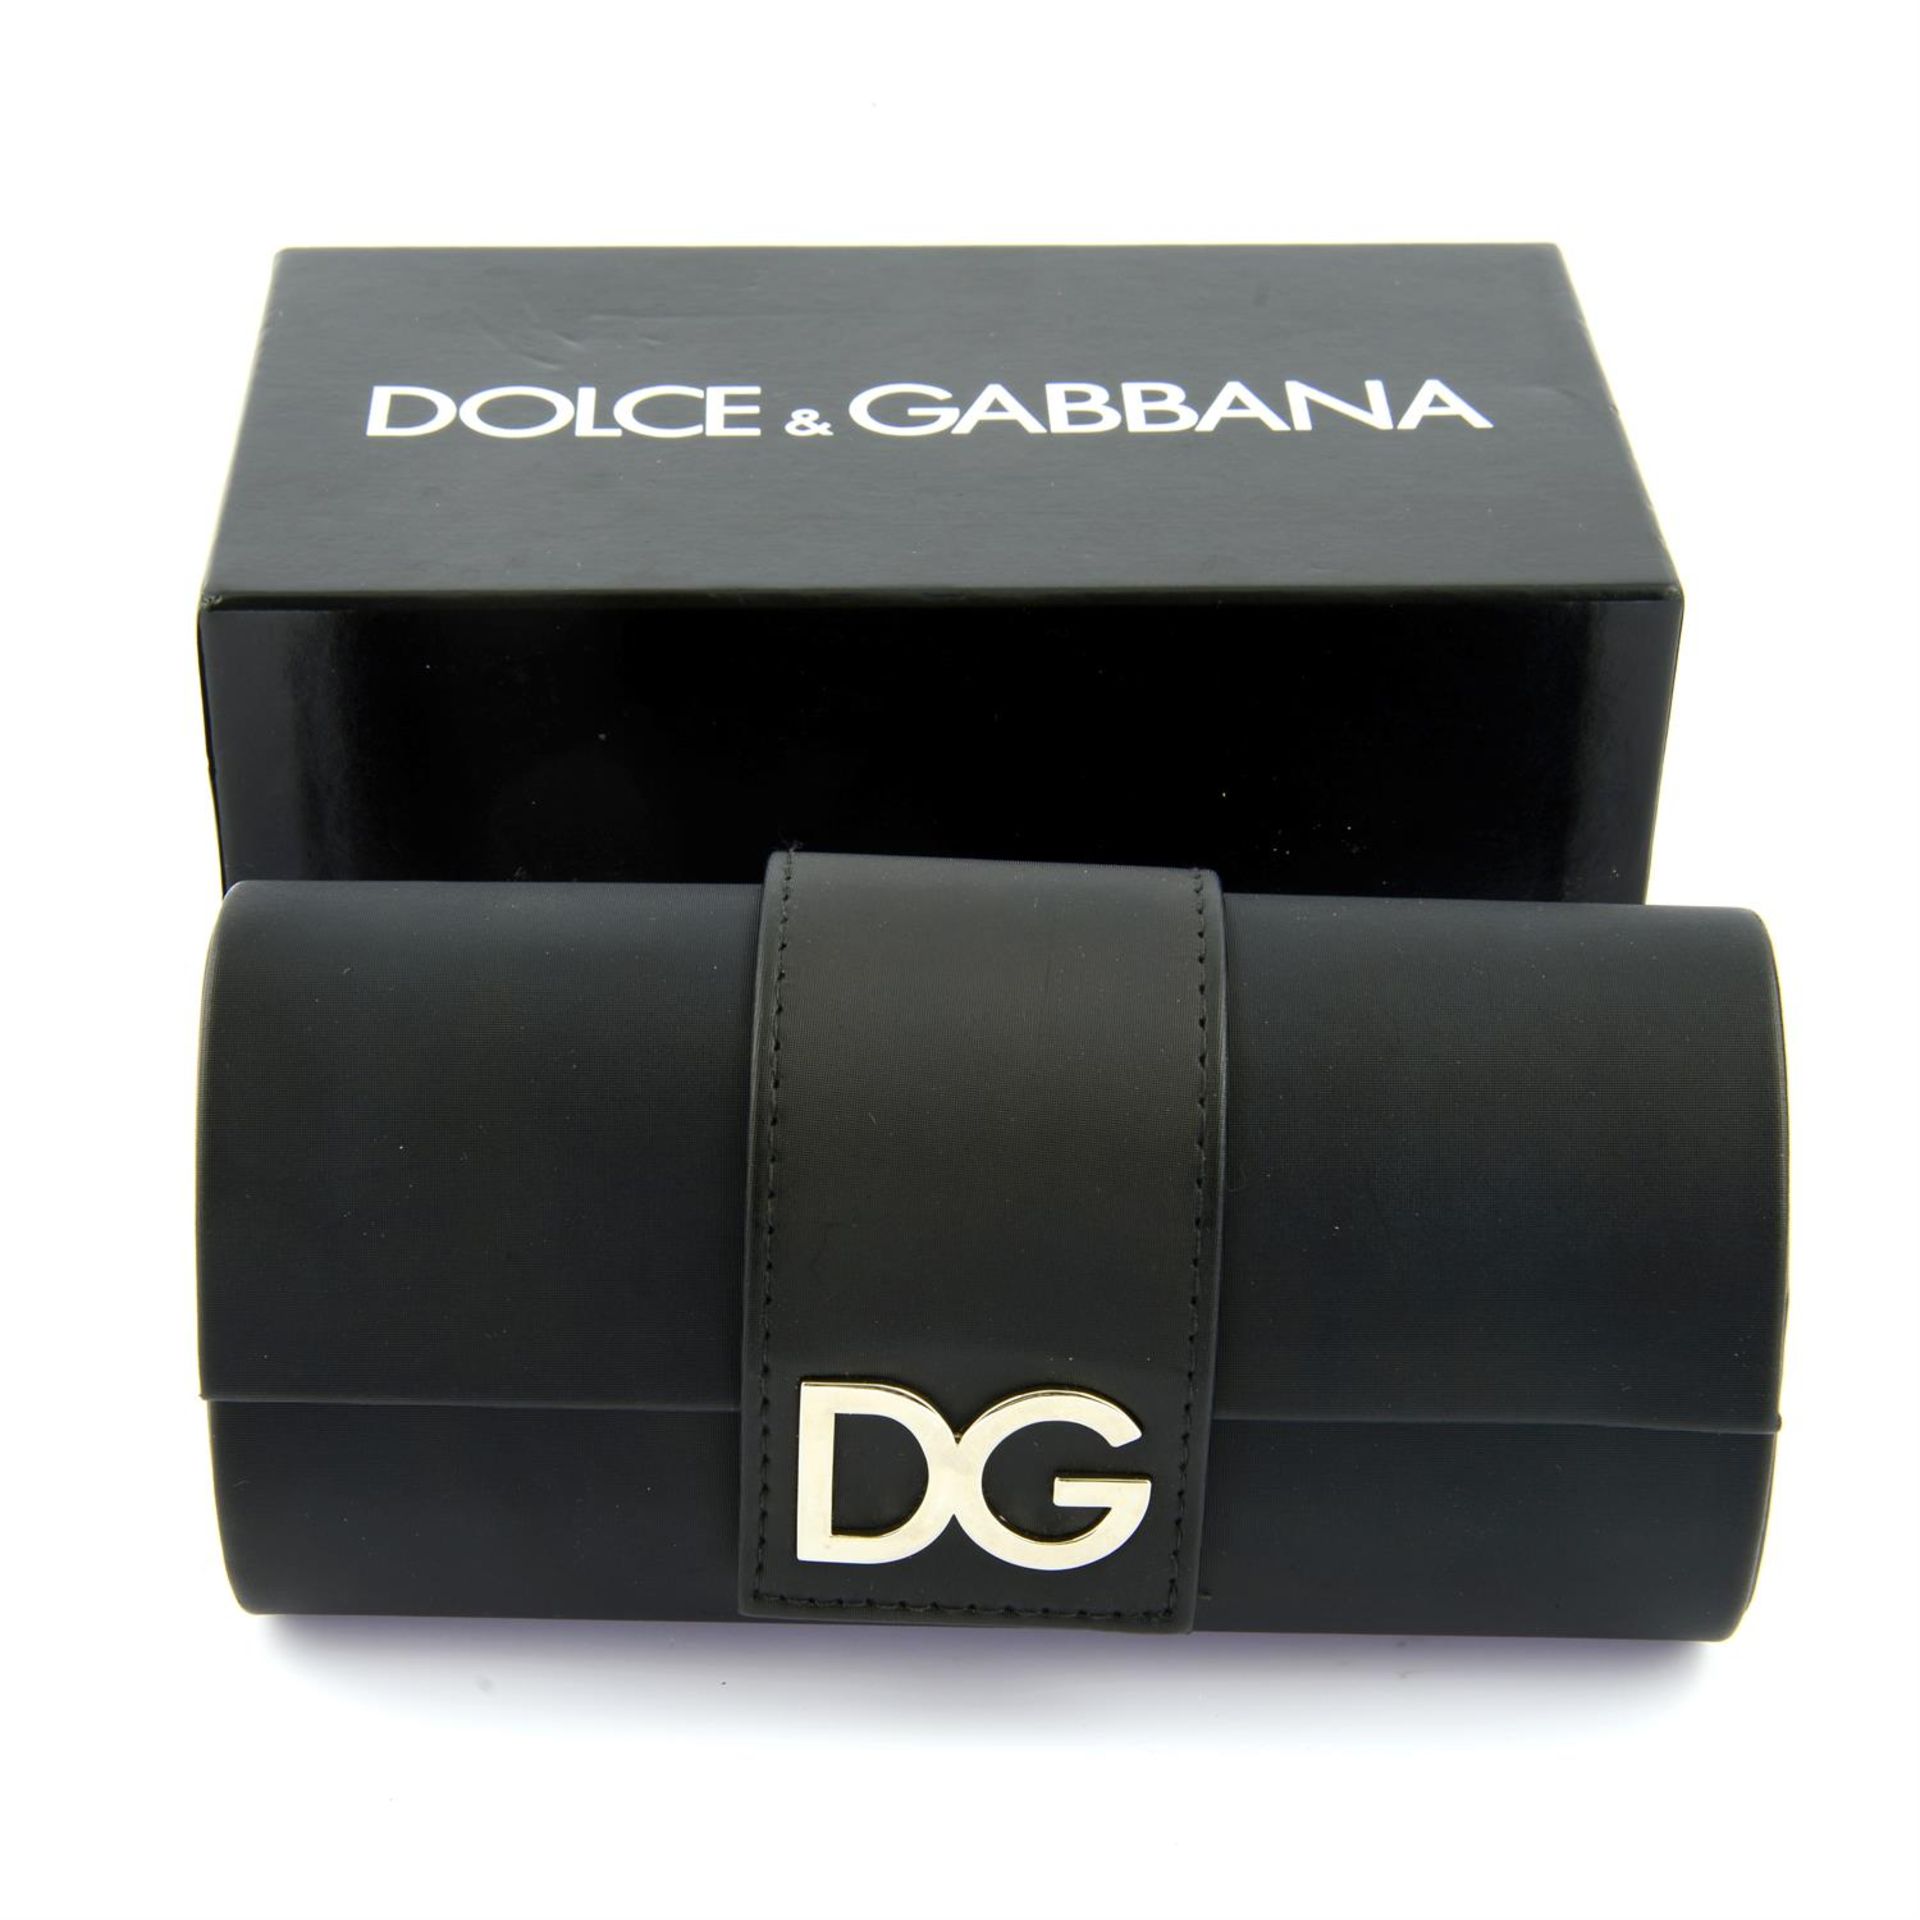 DOLCE & GABBANA - a pair of sunglasses. - Image 3 of 3